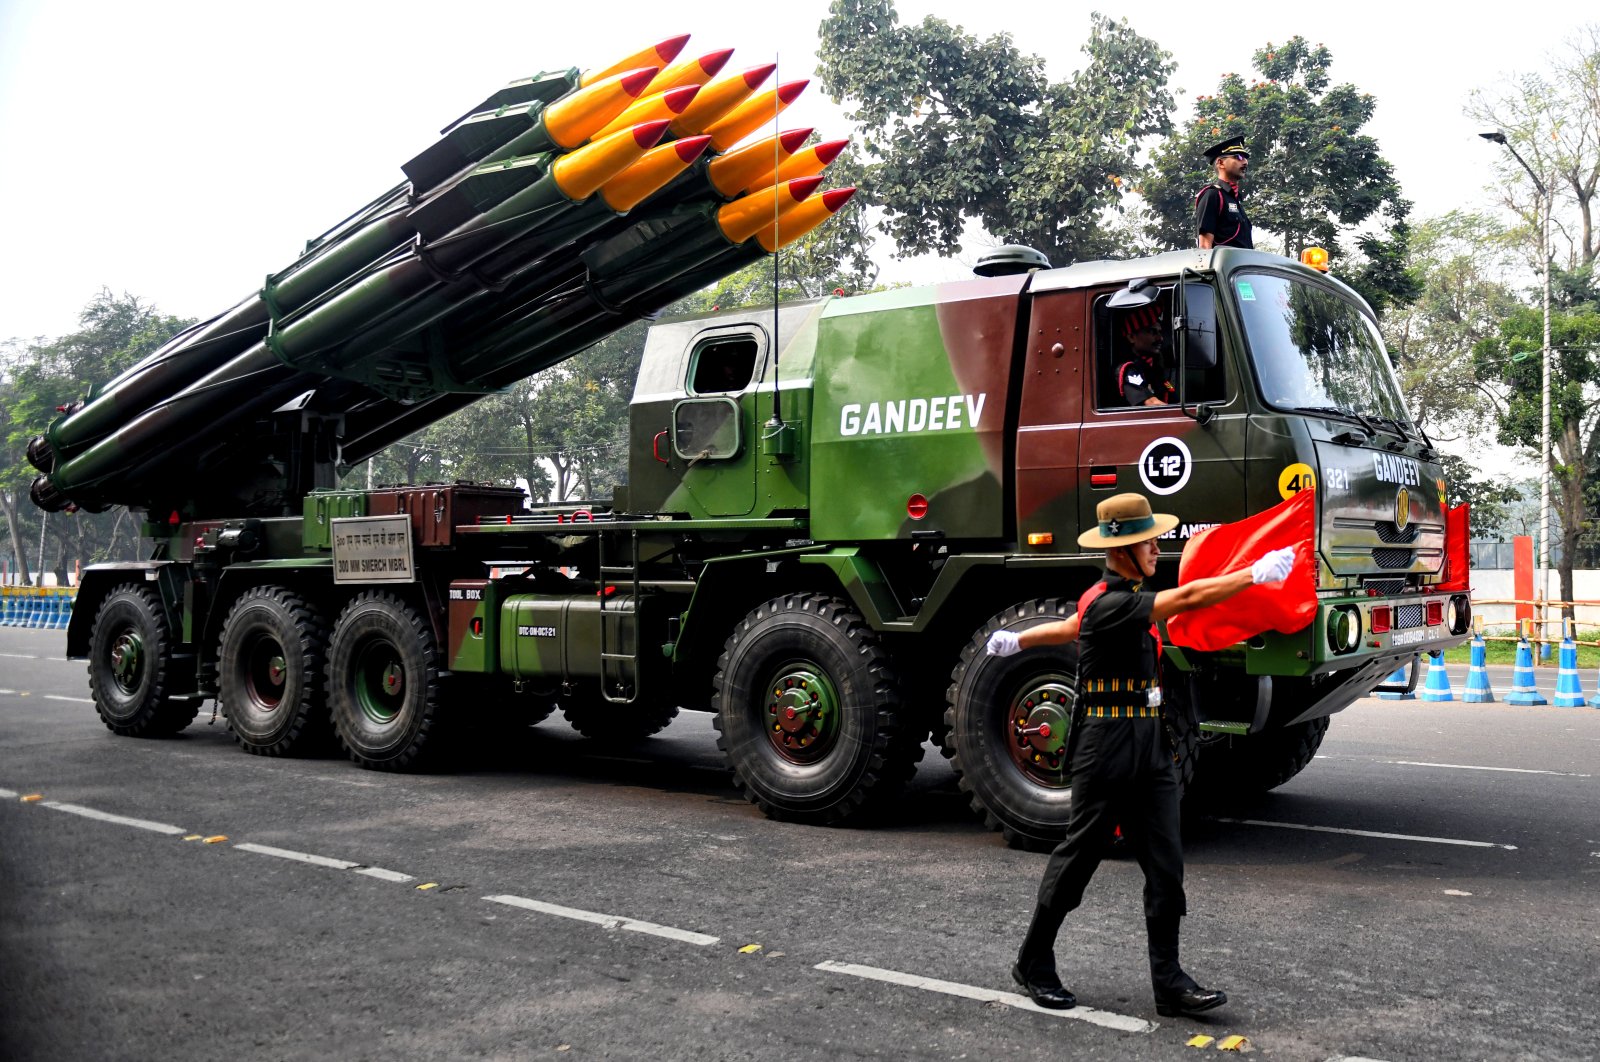 Missile Tank of Indian Army seen during the parade of Indian Republic Day at Redroad, Kolkata, Jan. 26, 2022. (Reuters File Photo)